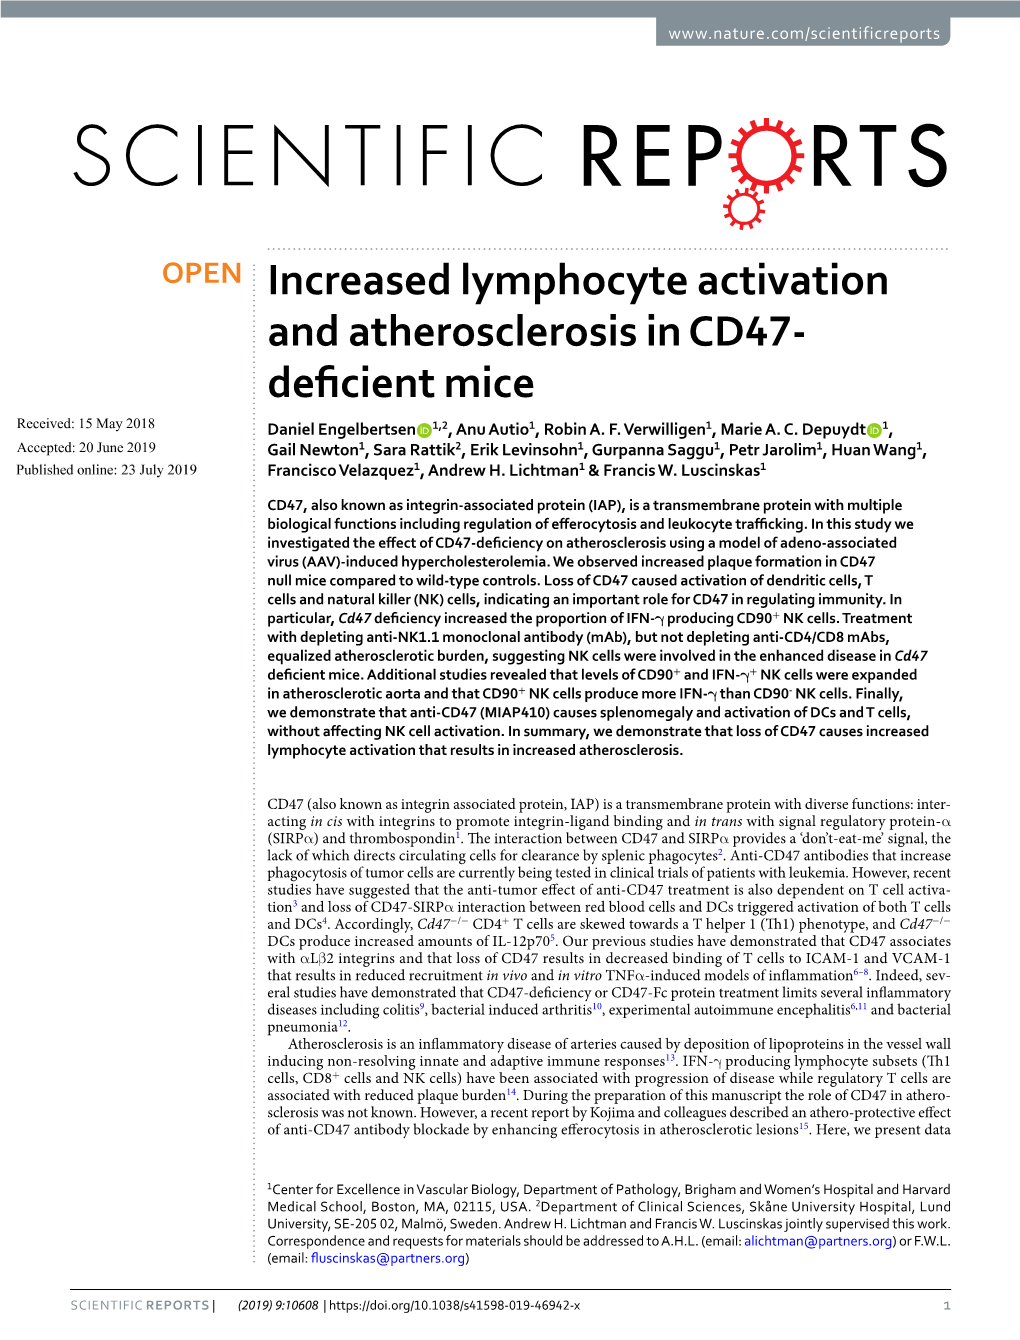 Increased Lymphocyte Activation and Atherosclerosis in CD47-Deficient